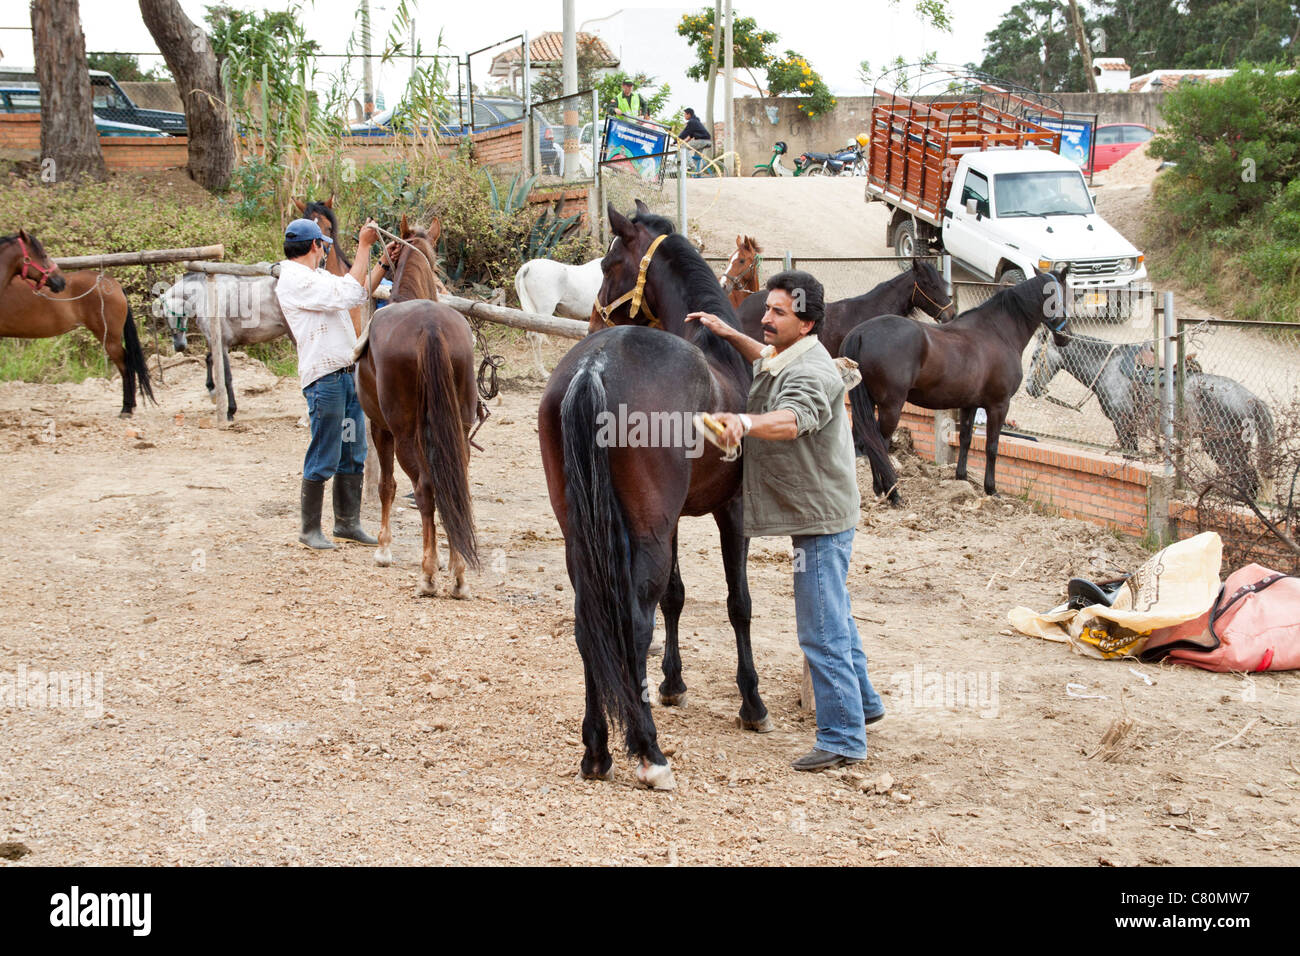 Men taking care of their horses in order to show them at the horses fair. Villa de Leyva, Boyacá, Colombia, South America Stock Photo